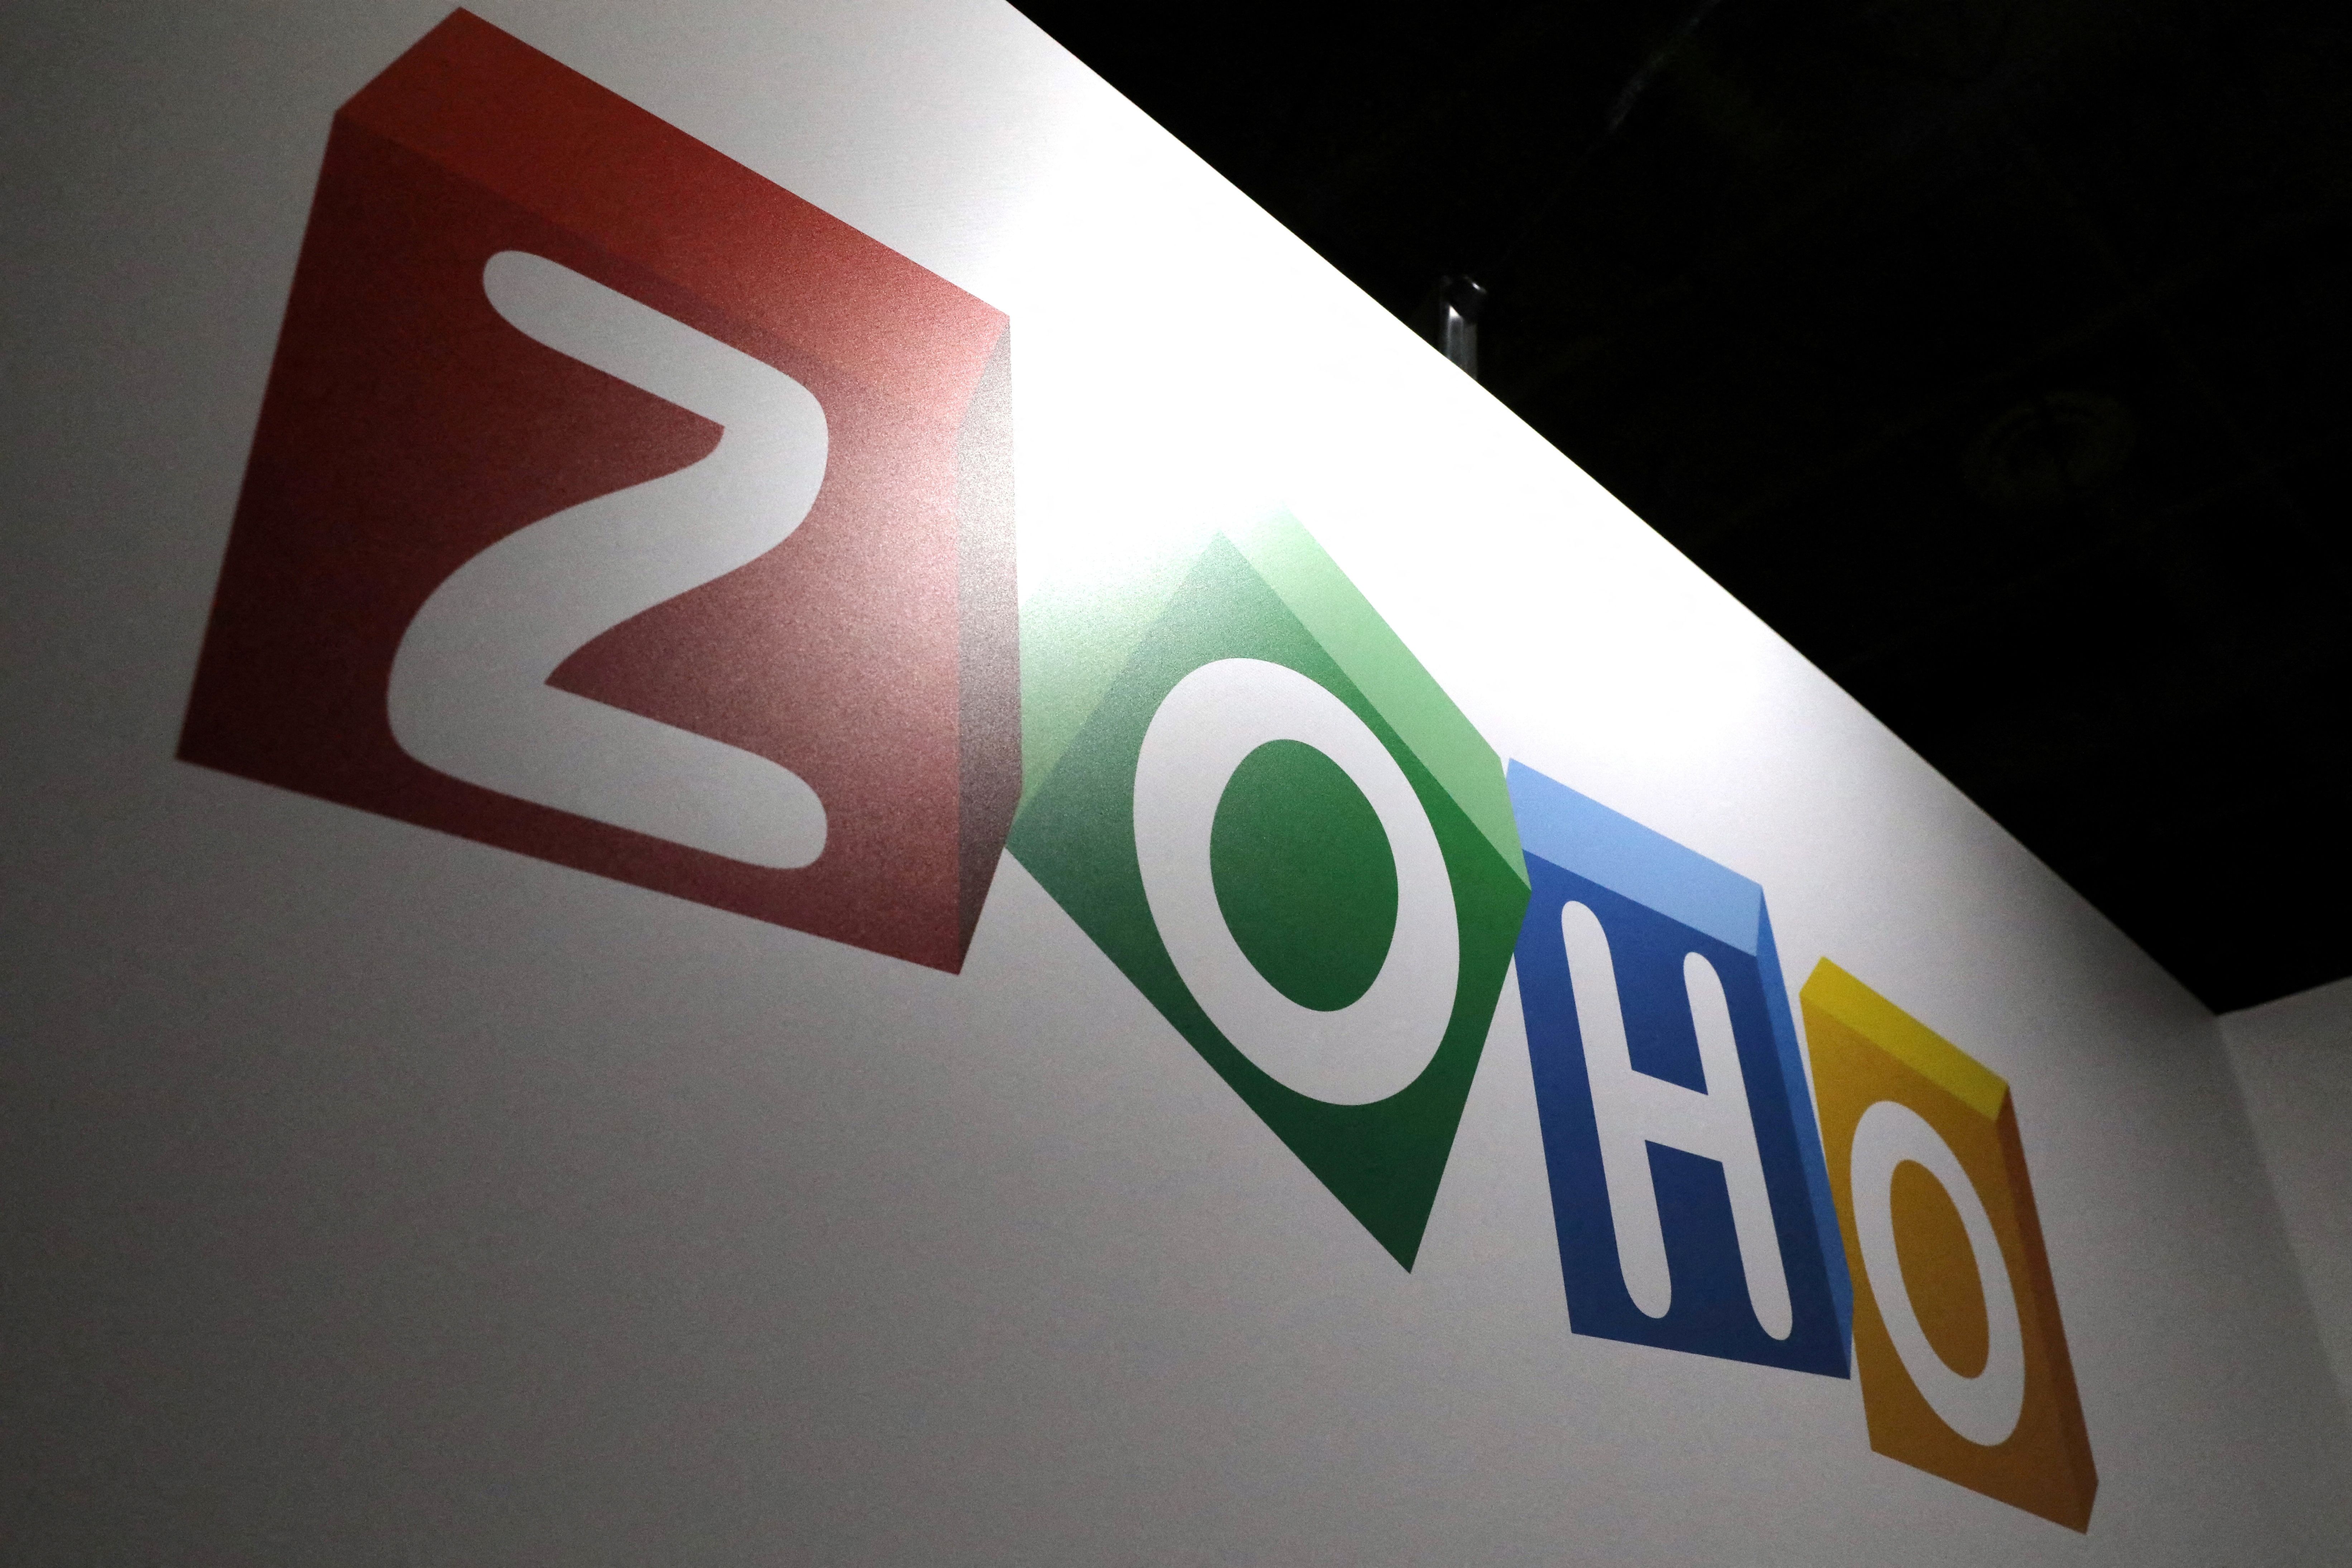 Display for Indian multinational technology company Zoho in Toronto